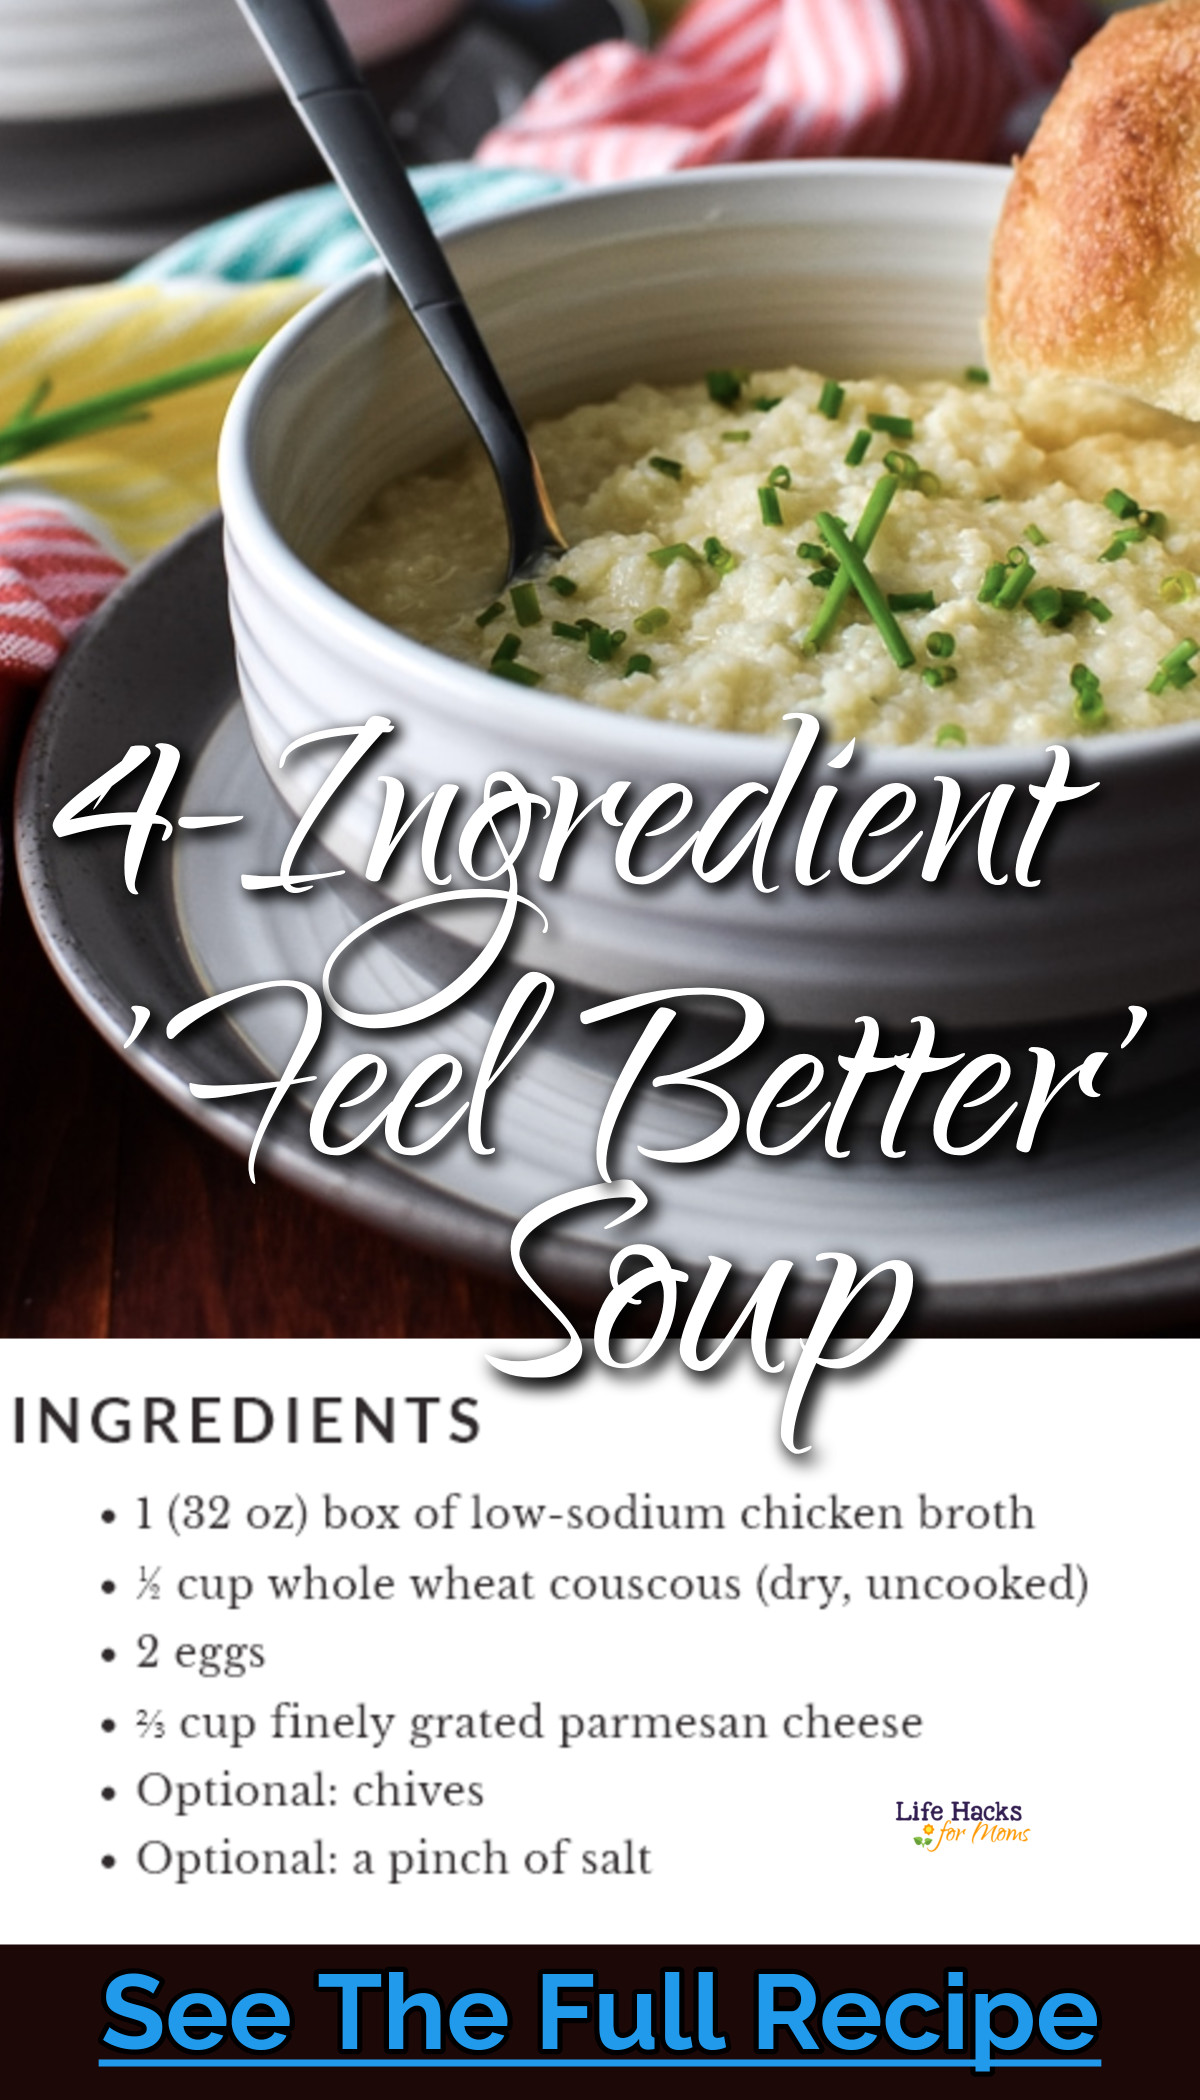 easy soup recipes to make ahead and freeze - 4 ingredient feel better soup